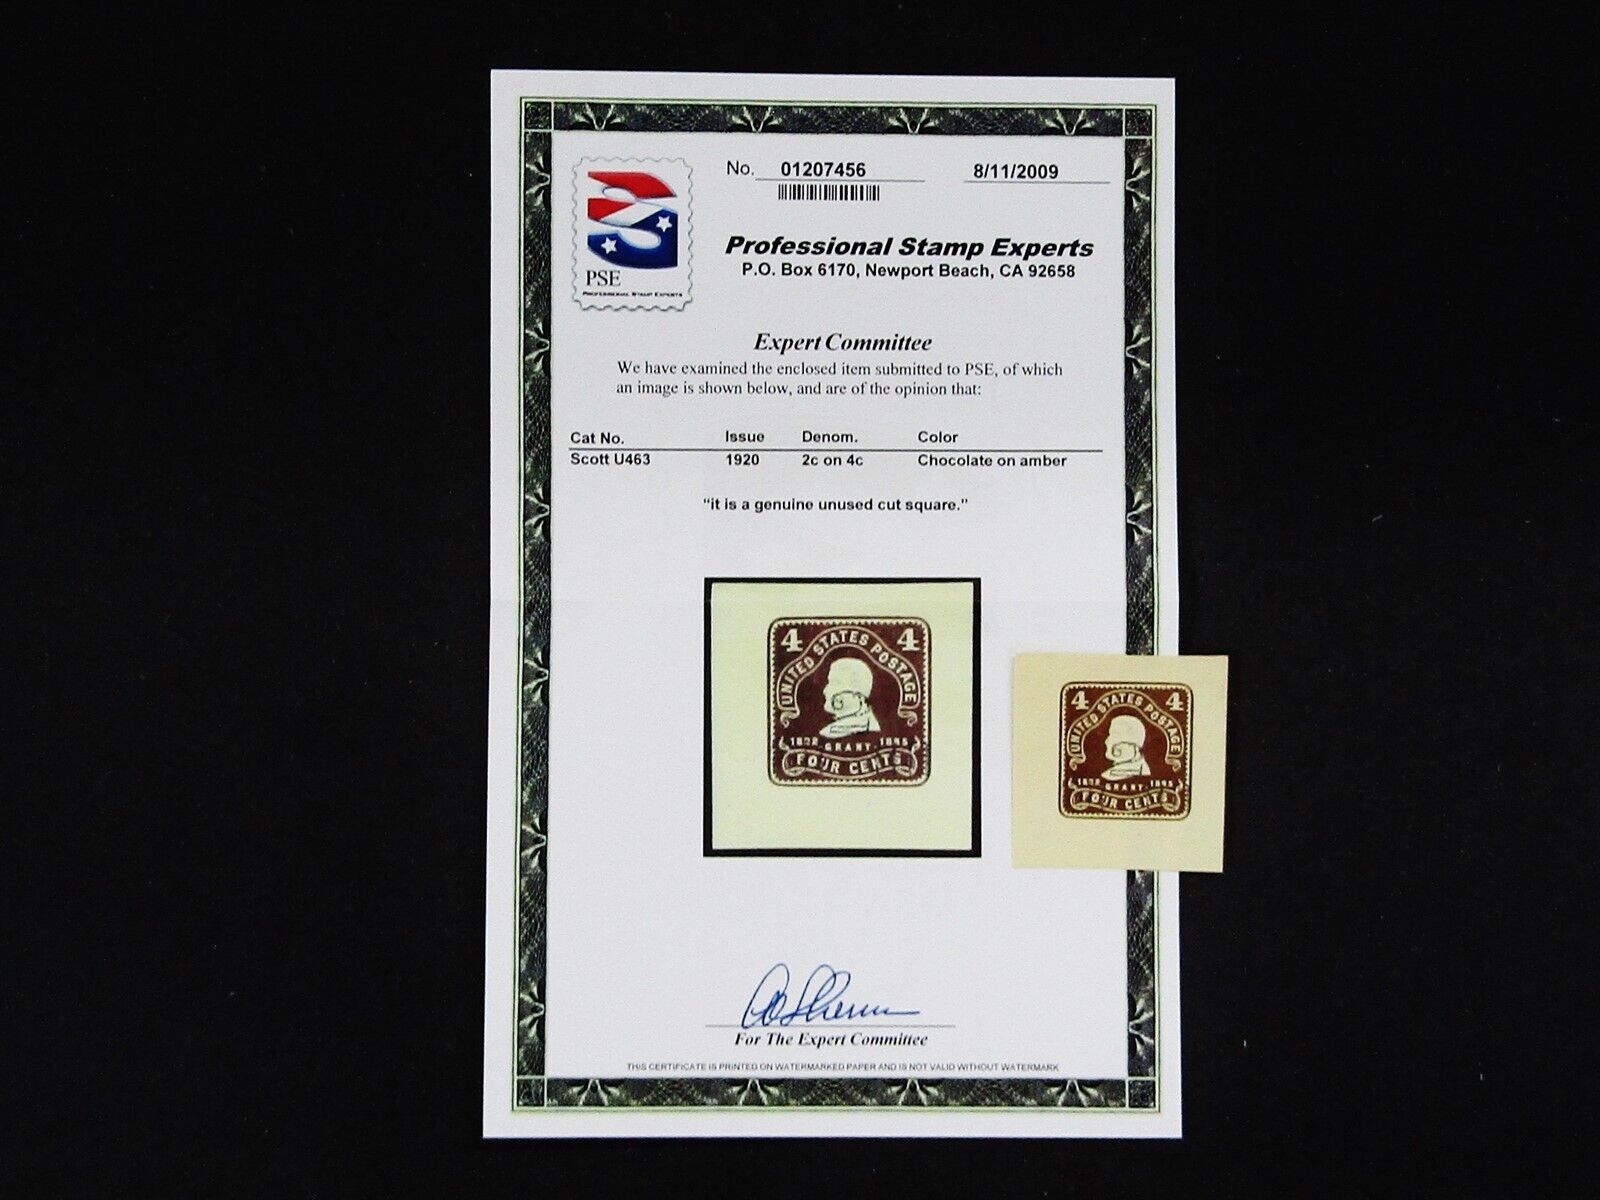 nystamps US Cut Square Stamp  U463 Mint H 1100 PSE Certification S8x1956